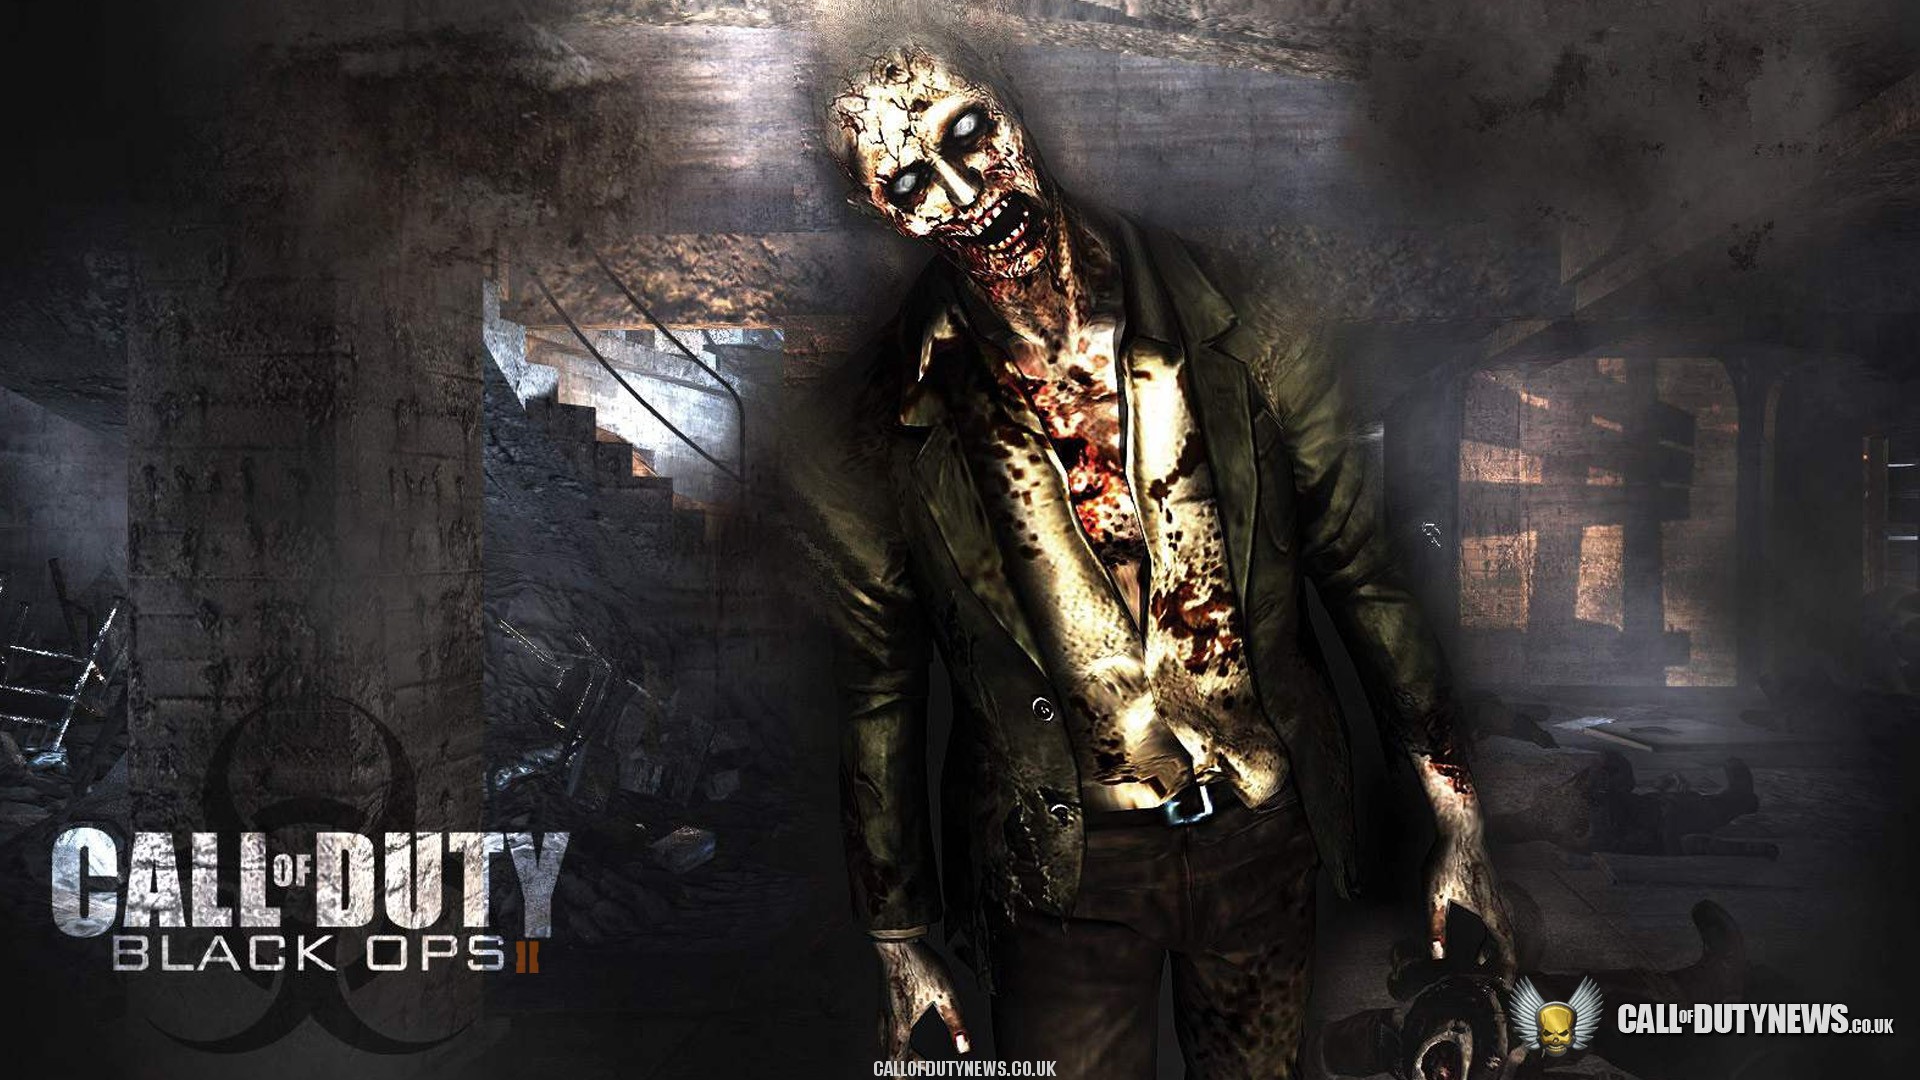 Black ops 2 wallpaper 71 zombie Call of Duty Blog